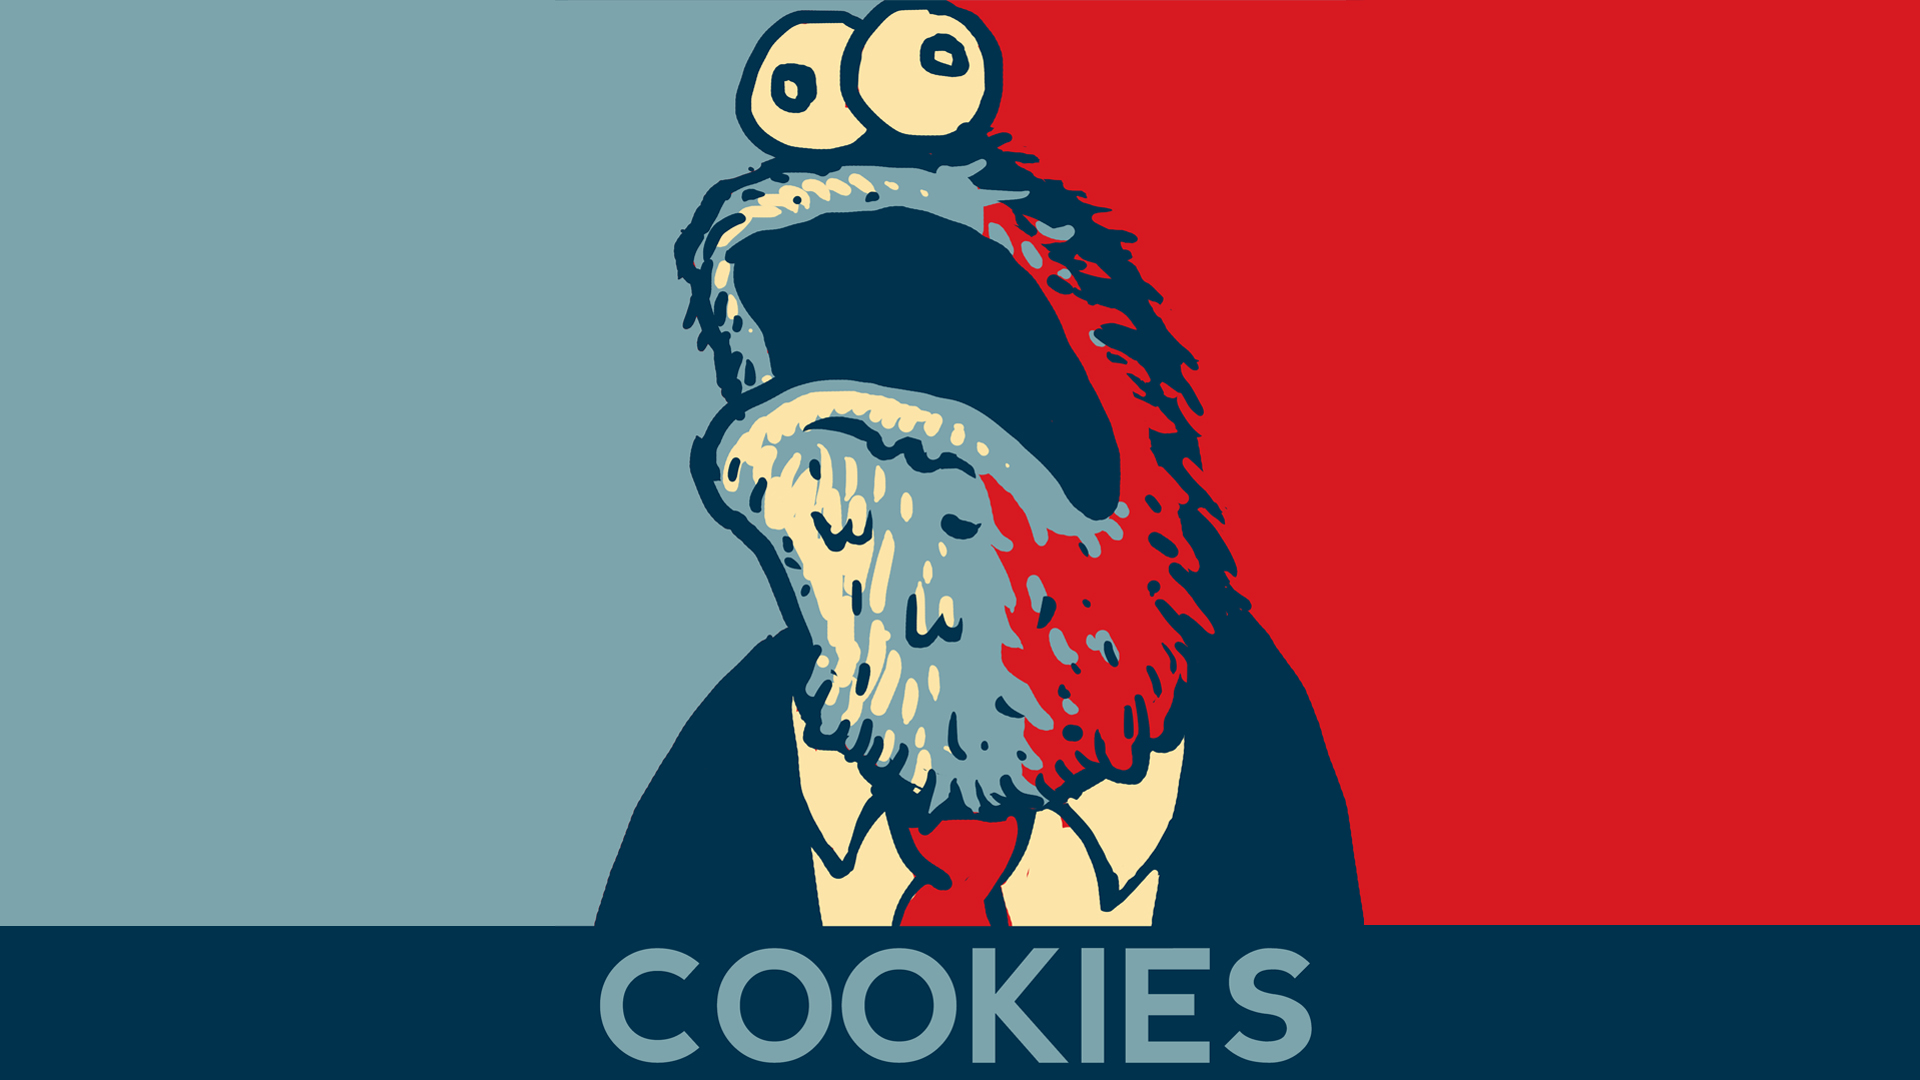 Cookie Monster Wallpaper Awesome